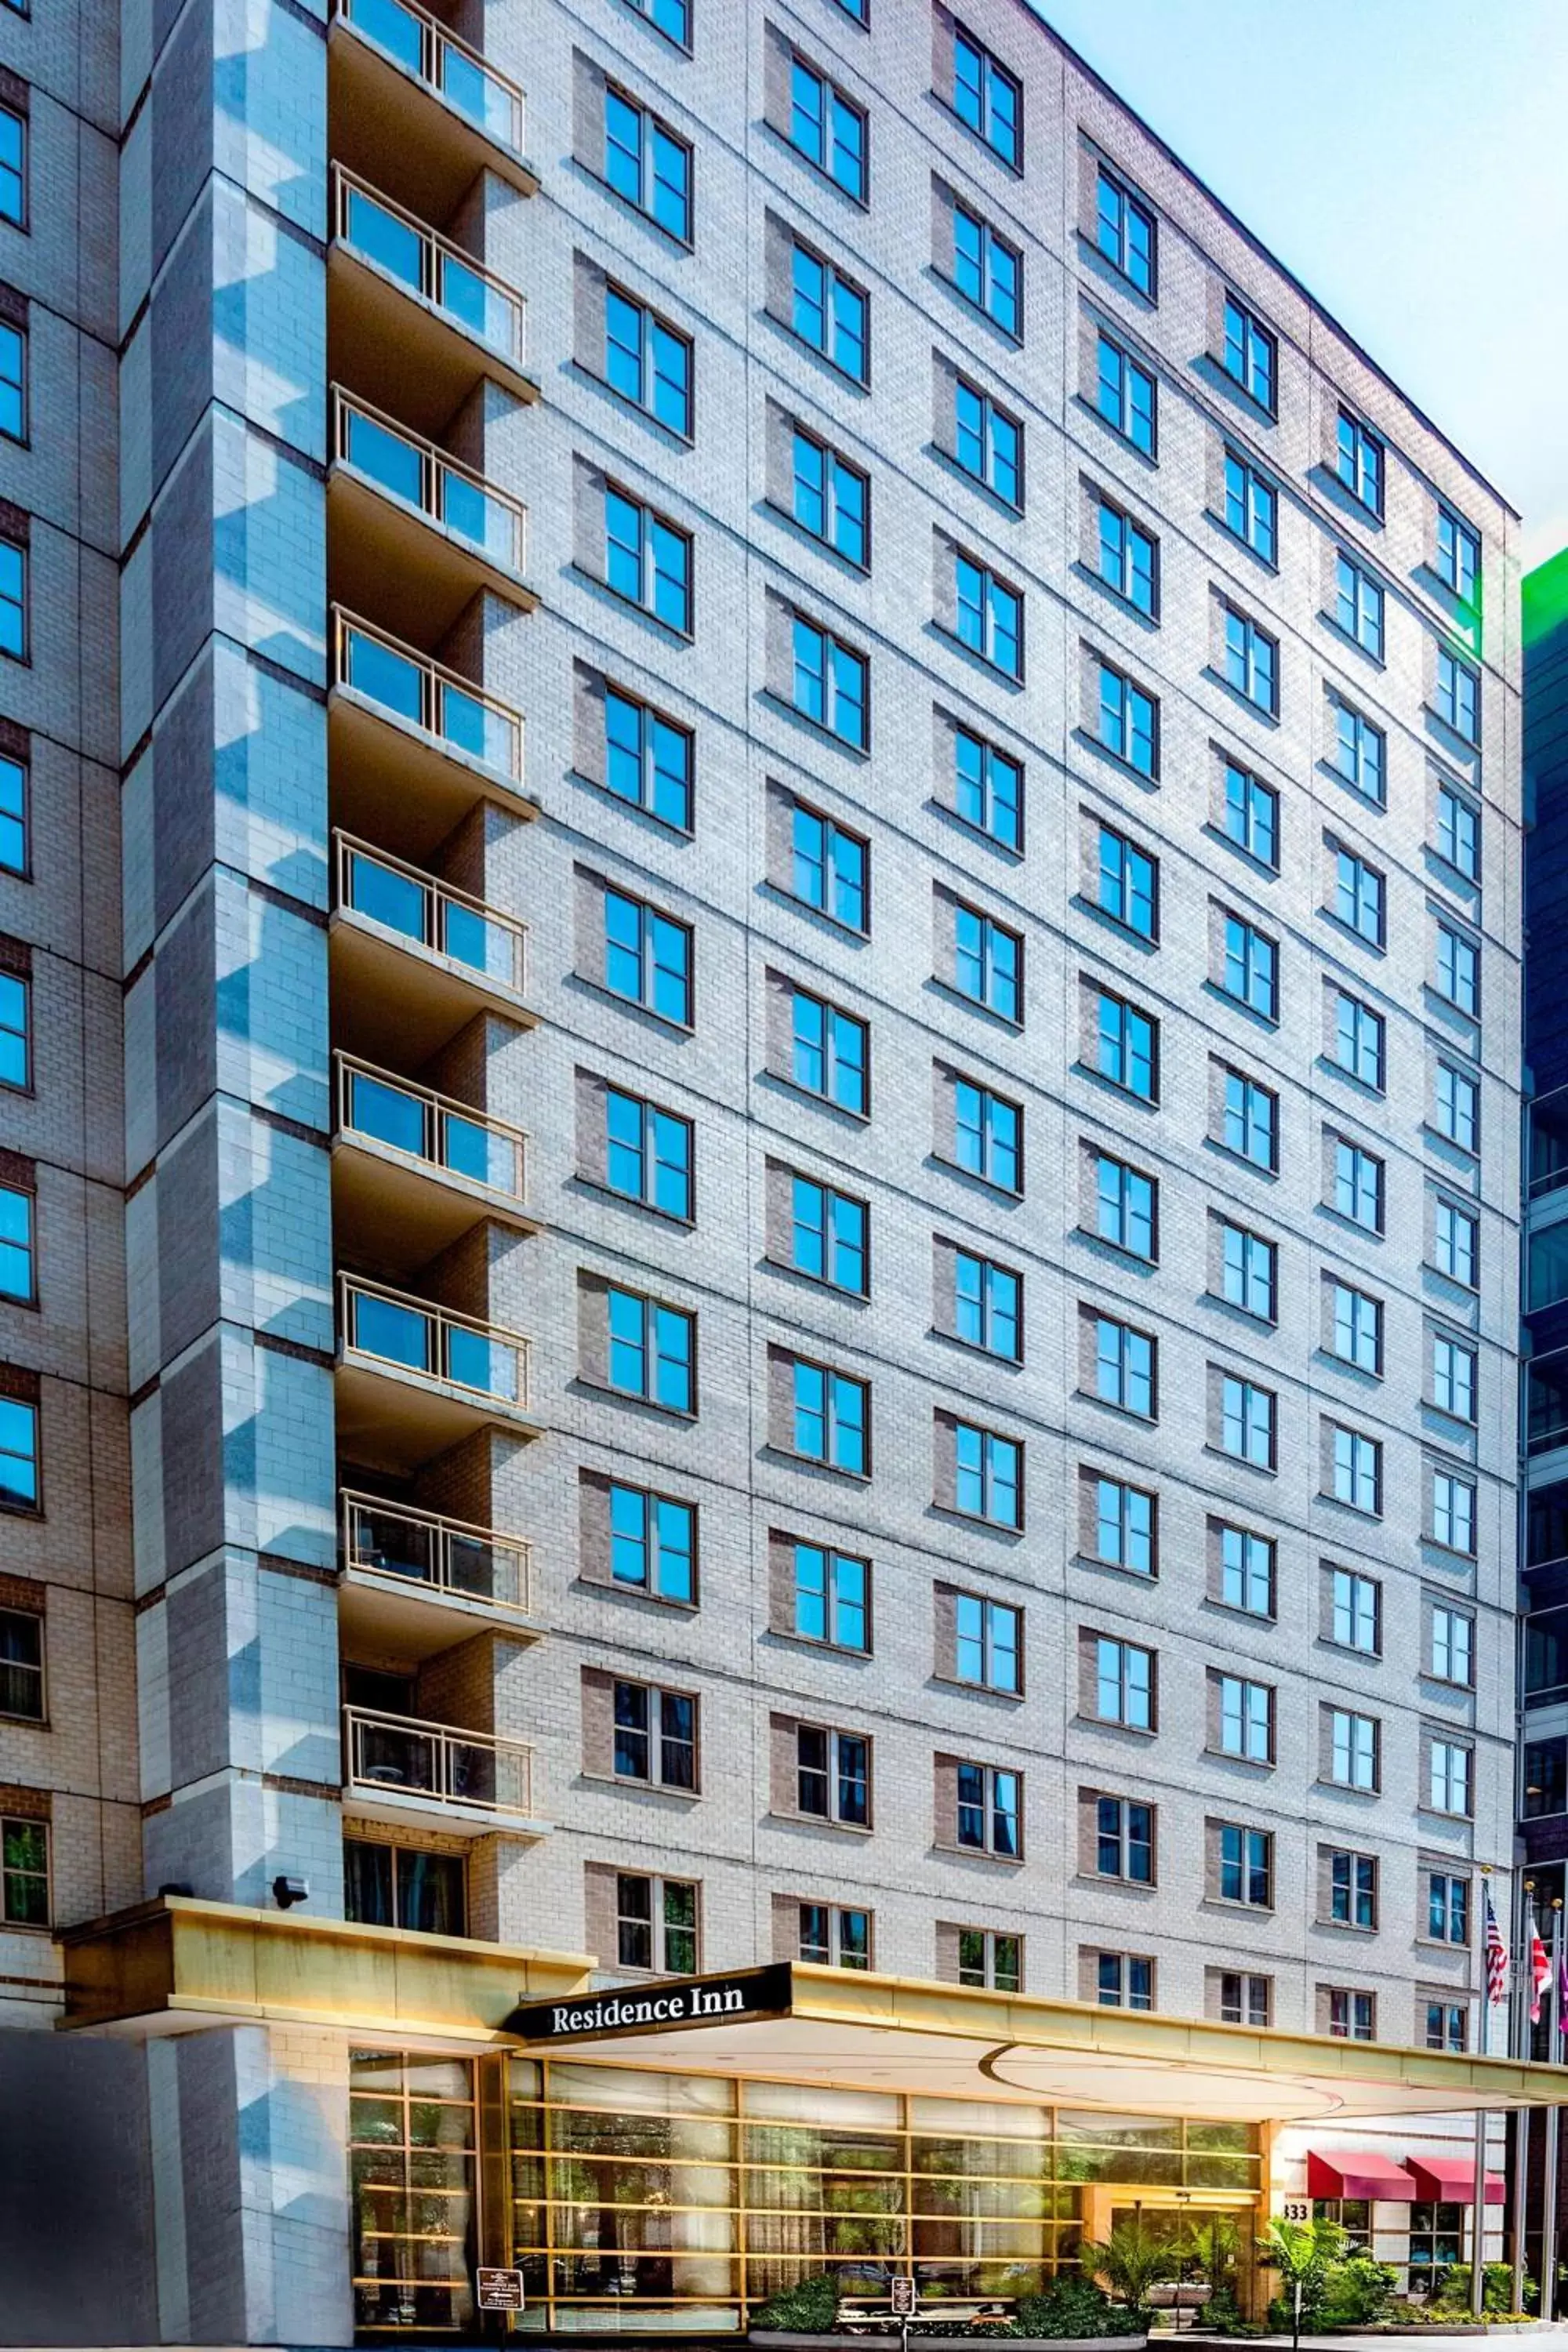 Property Building in Residence Inn by Marriott Washington, DC National Mall